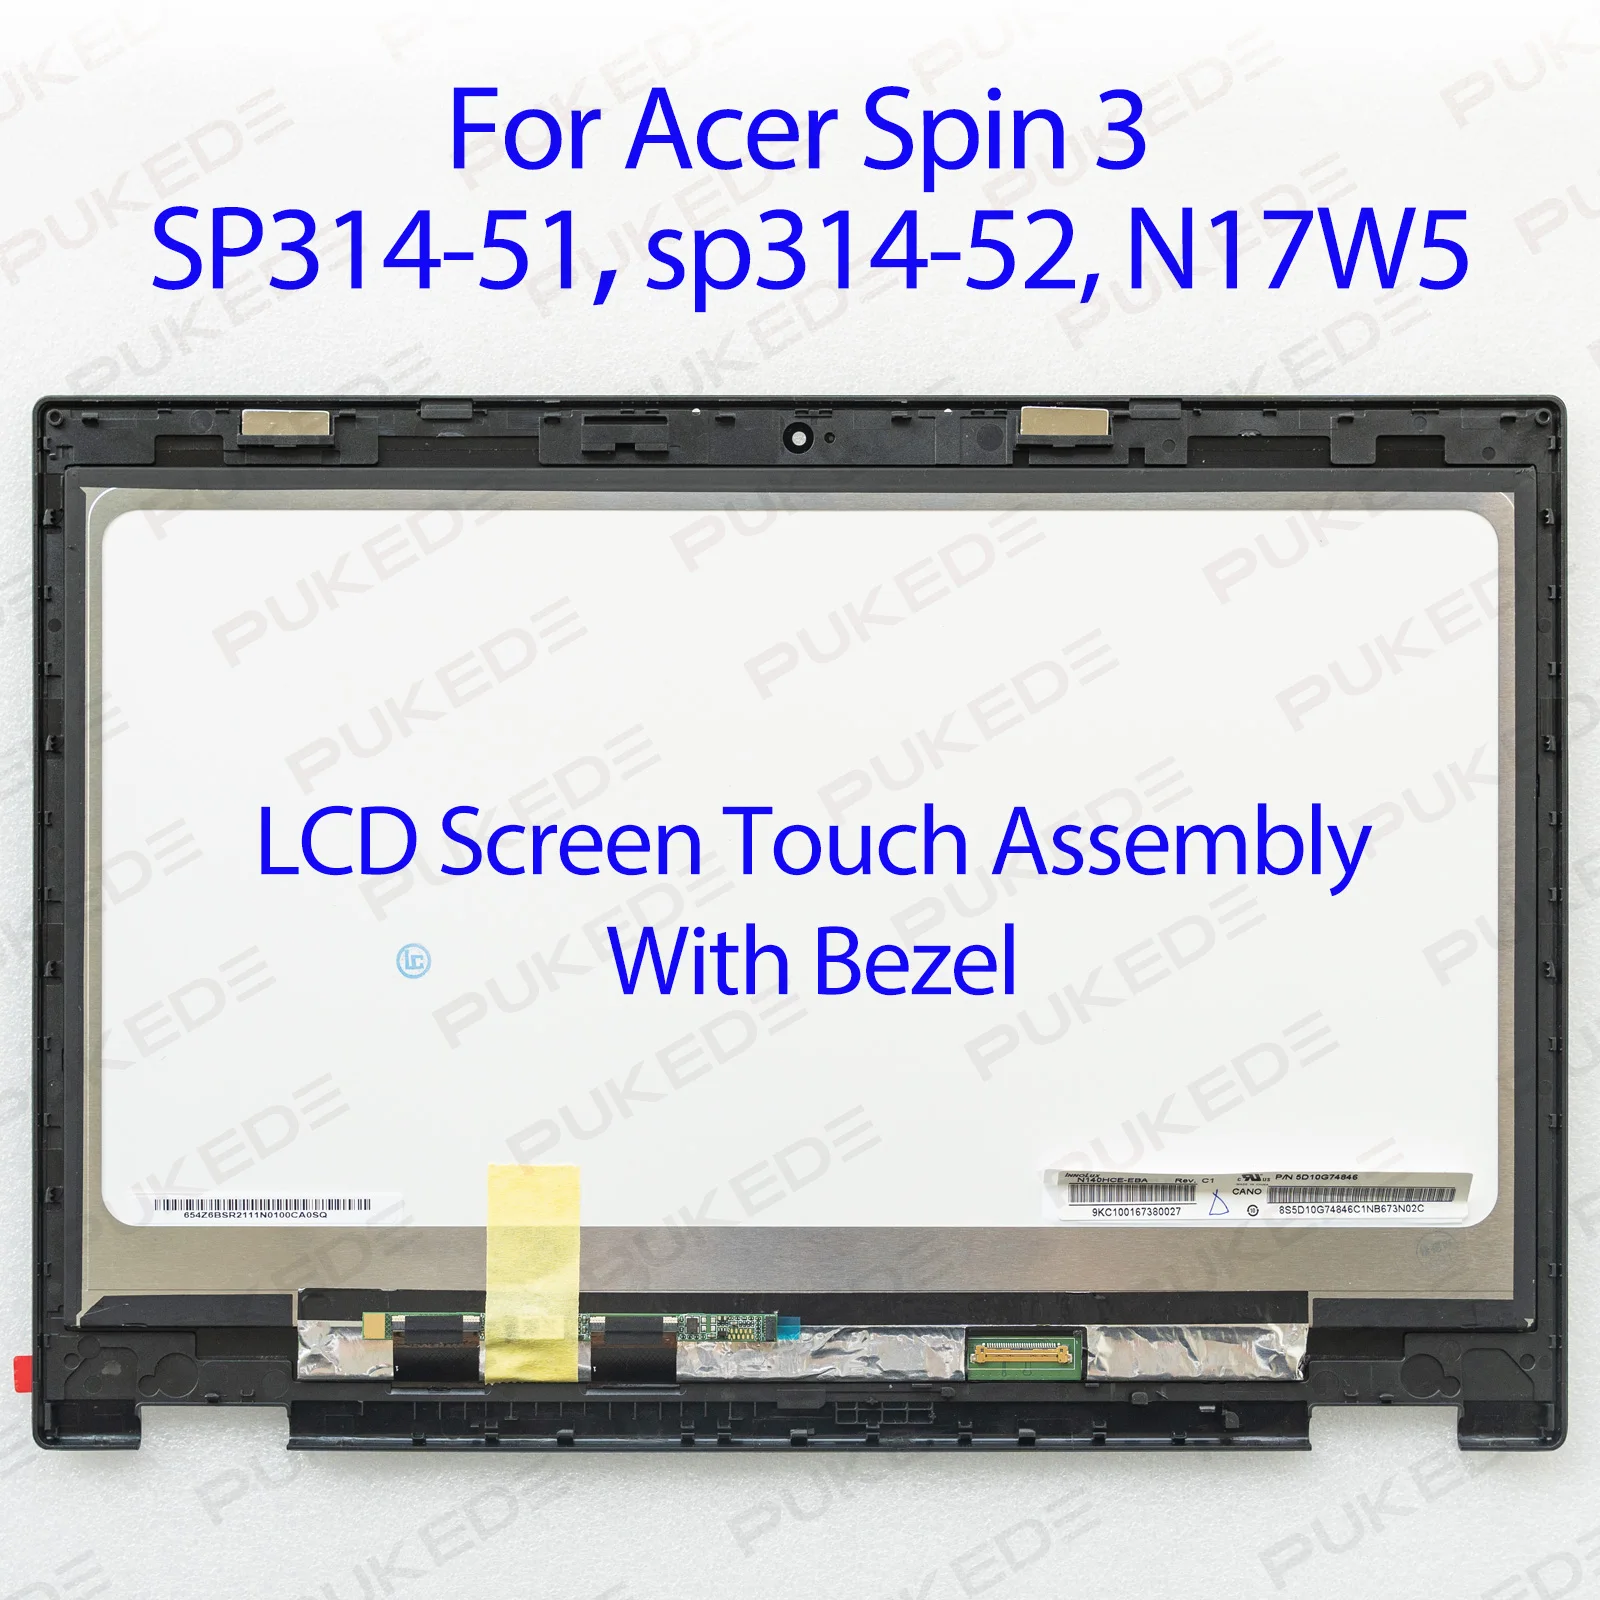 

14.0'' Laptop LCD Screen Touch Digitizer Assembly for Acer Spin 3 SP314-51 sp314-52 N17W5 FHD 1920x1080